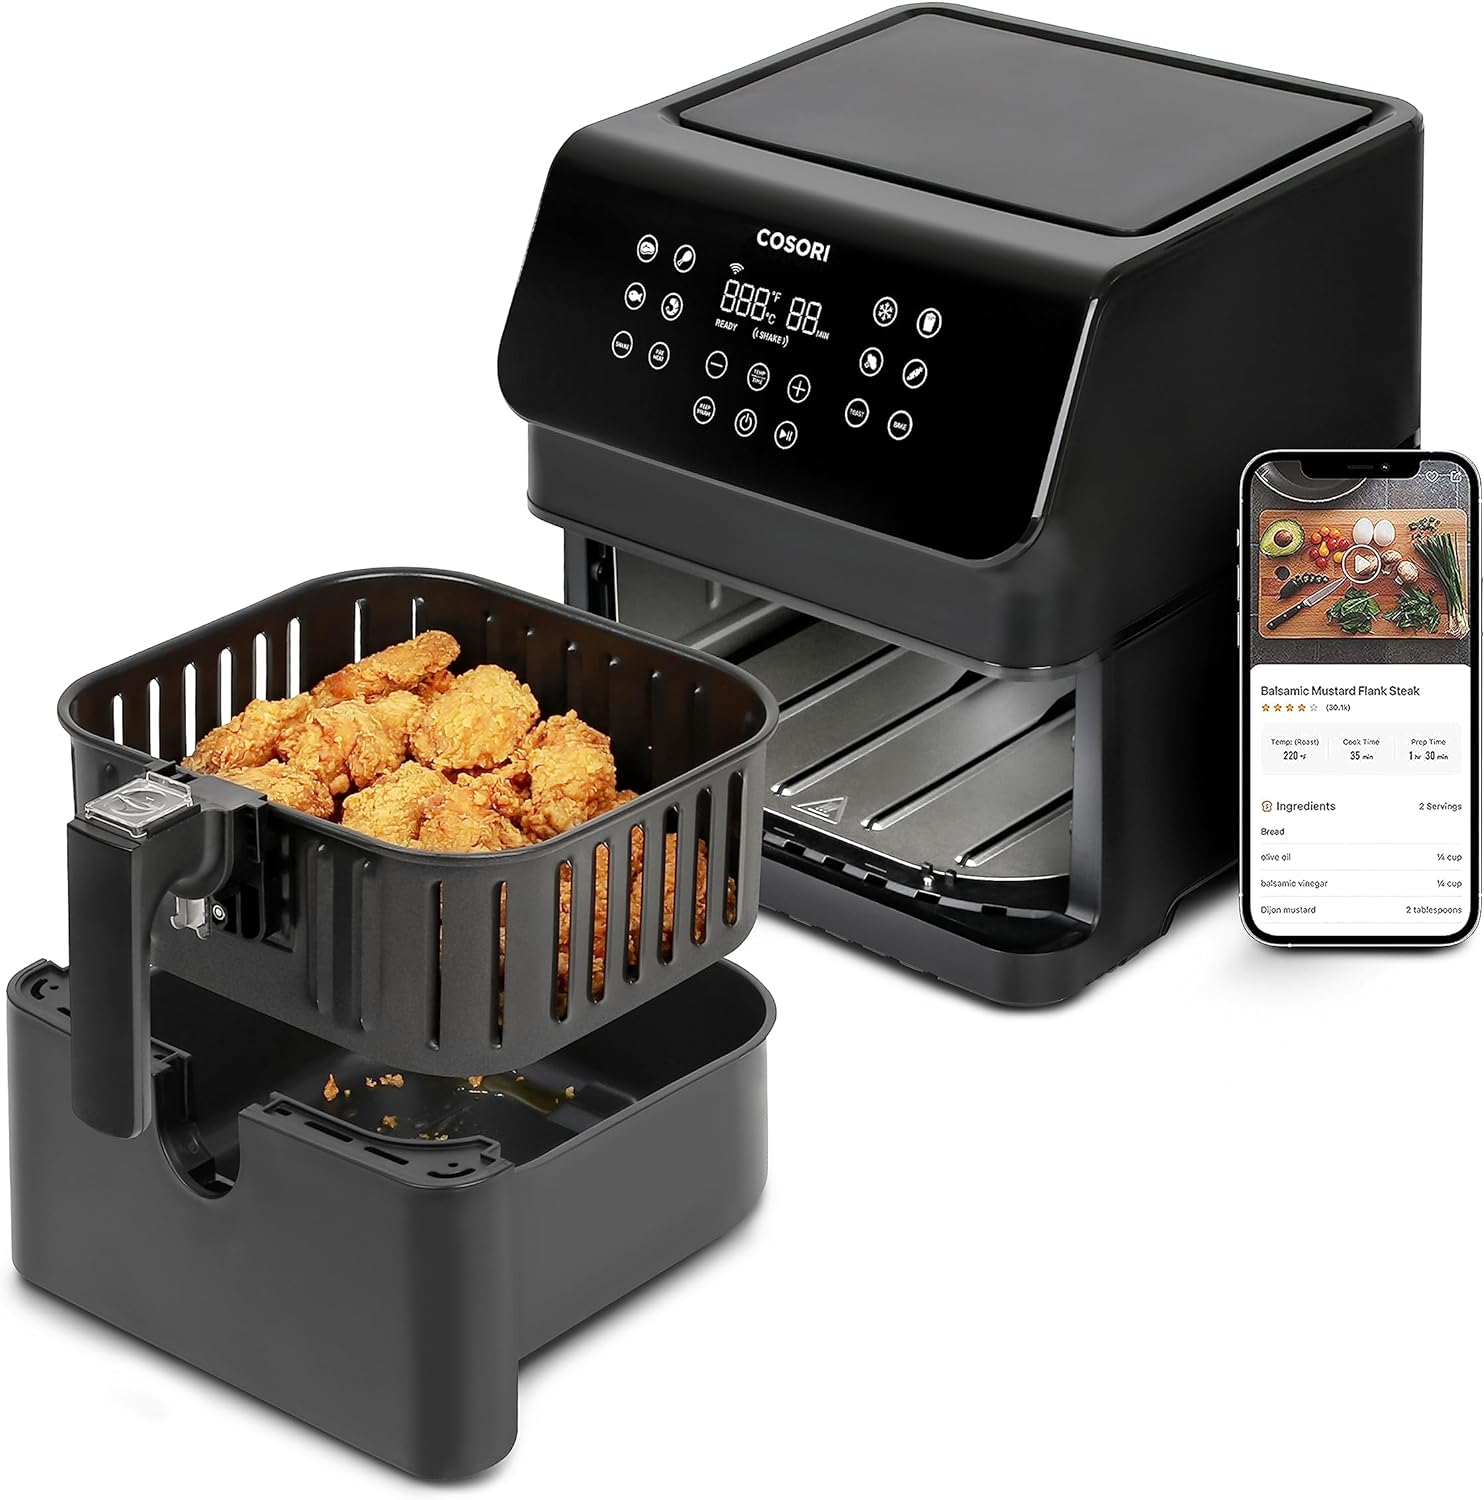 COSORI Pro II Air Fryer Oven Combo, 5.8QT Large Airfryer that Toast, Bake, 12-IN-1 Customizable Functions, Cookbook and Online Recipes, Nonstick  Detachable Square Basket, Dishwasher-Safe, Black